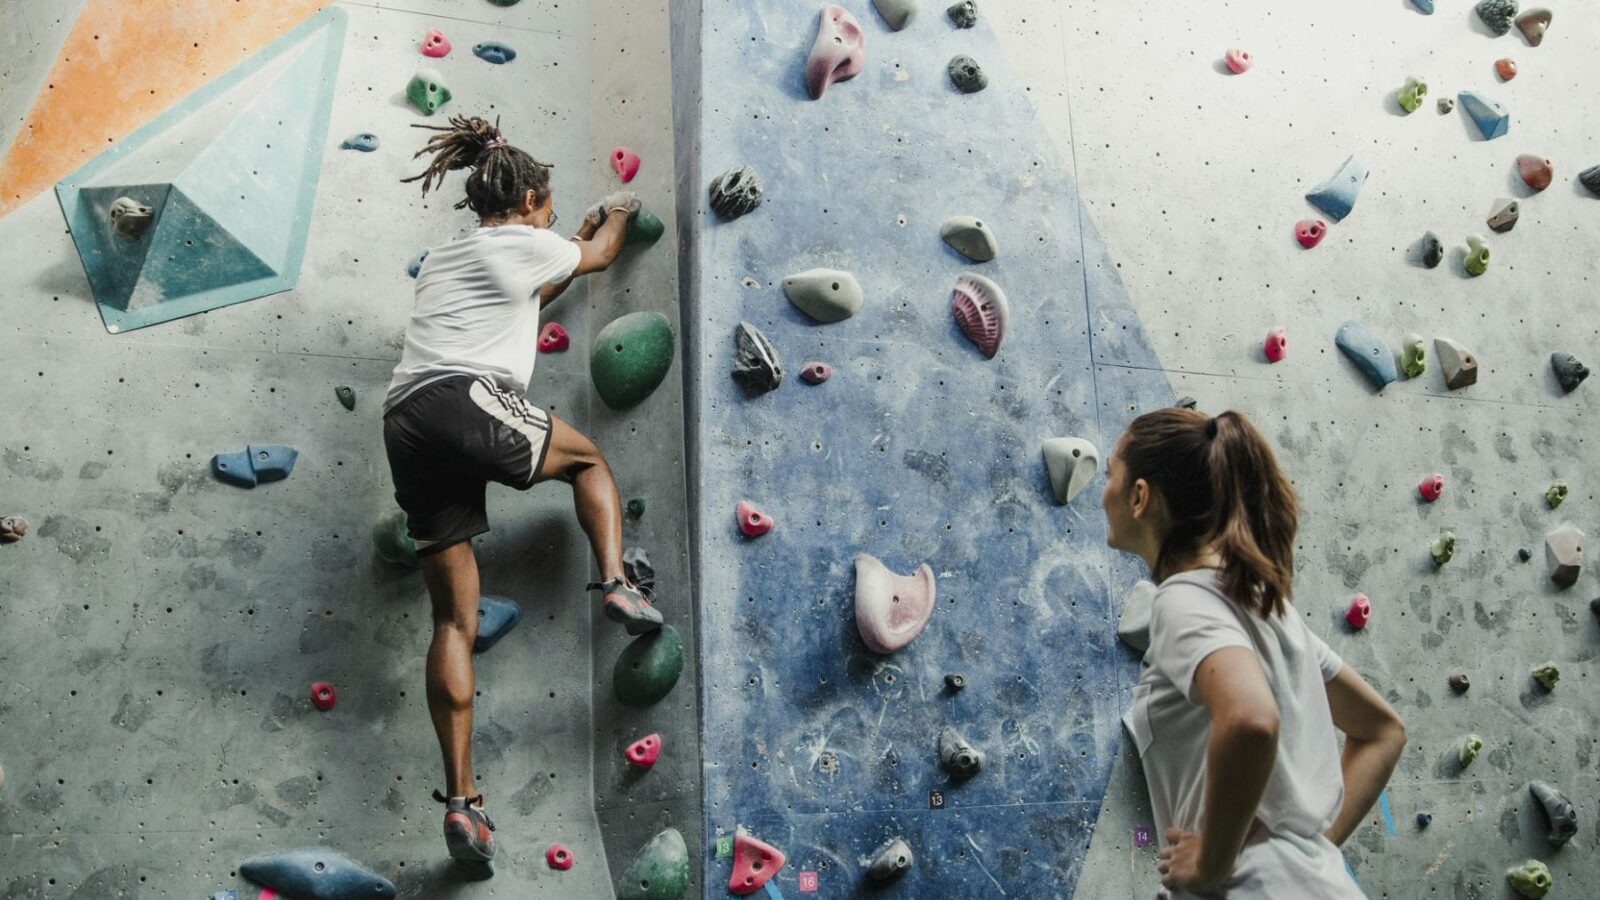 image of people climbing indoors